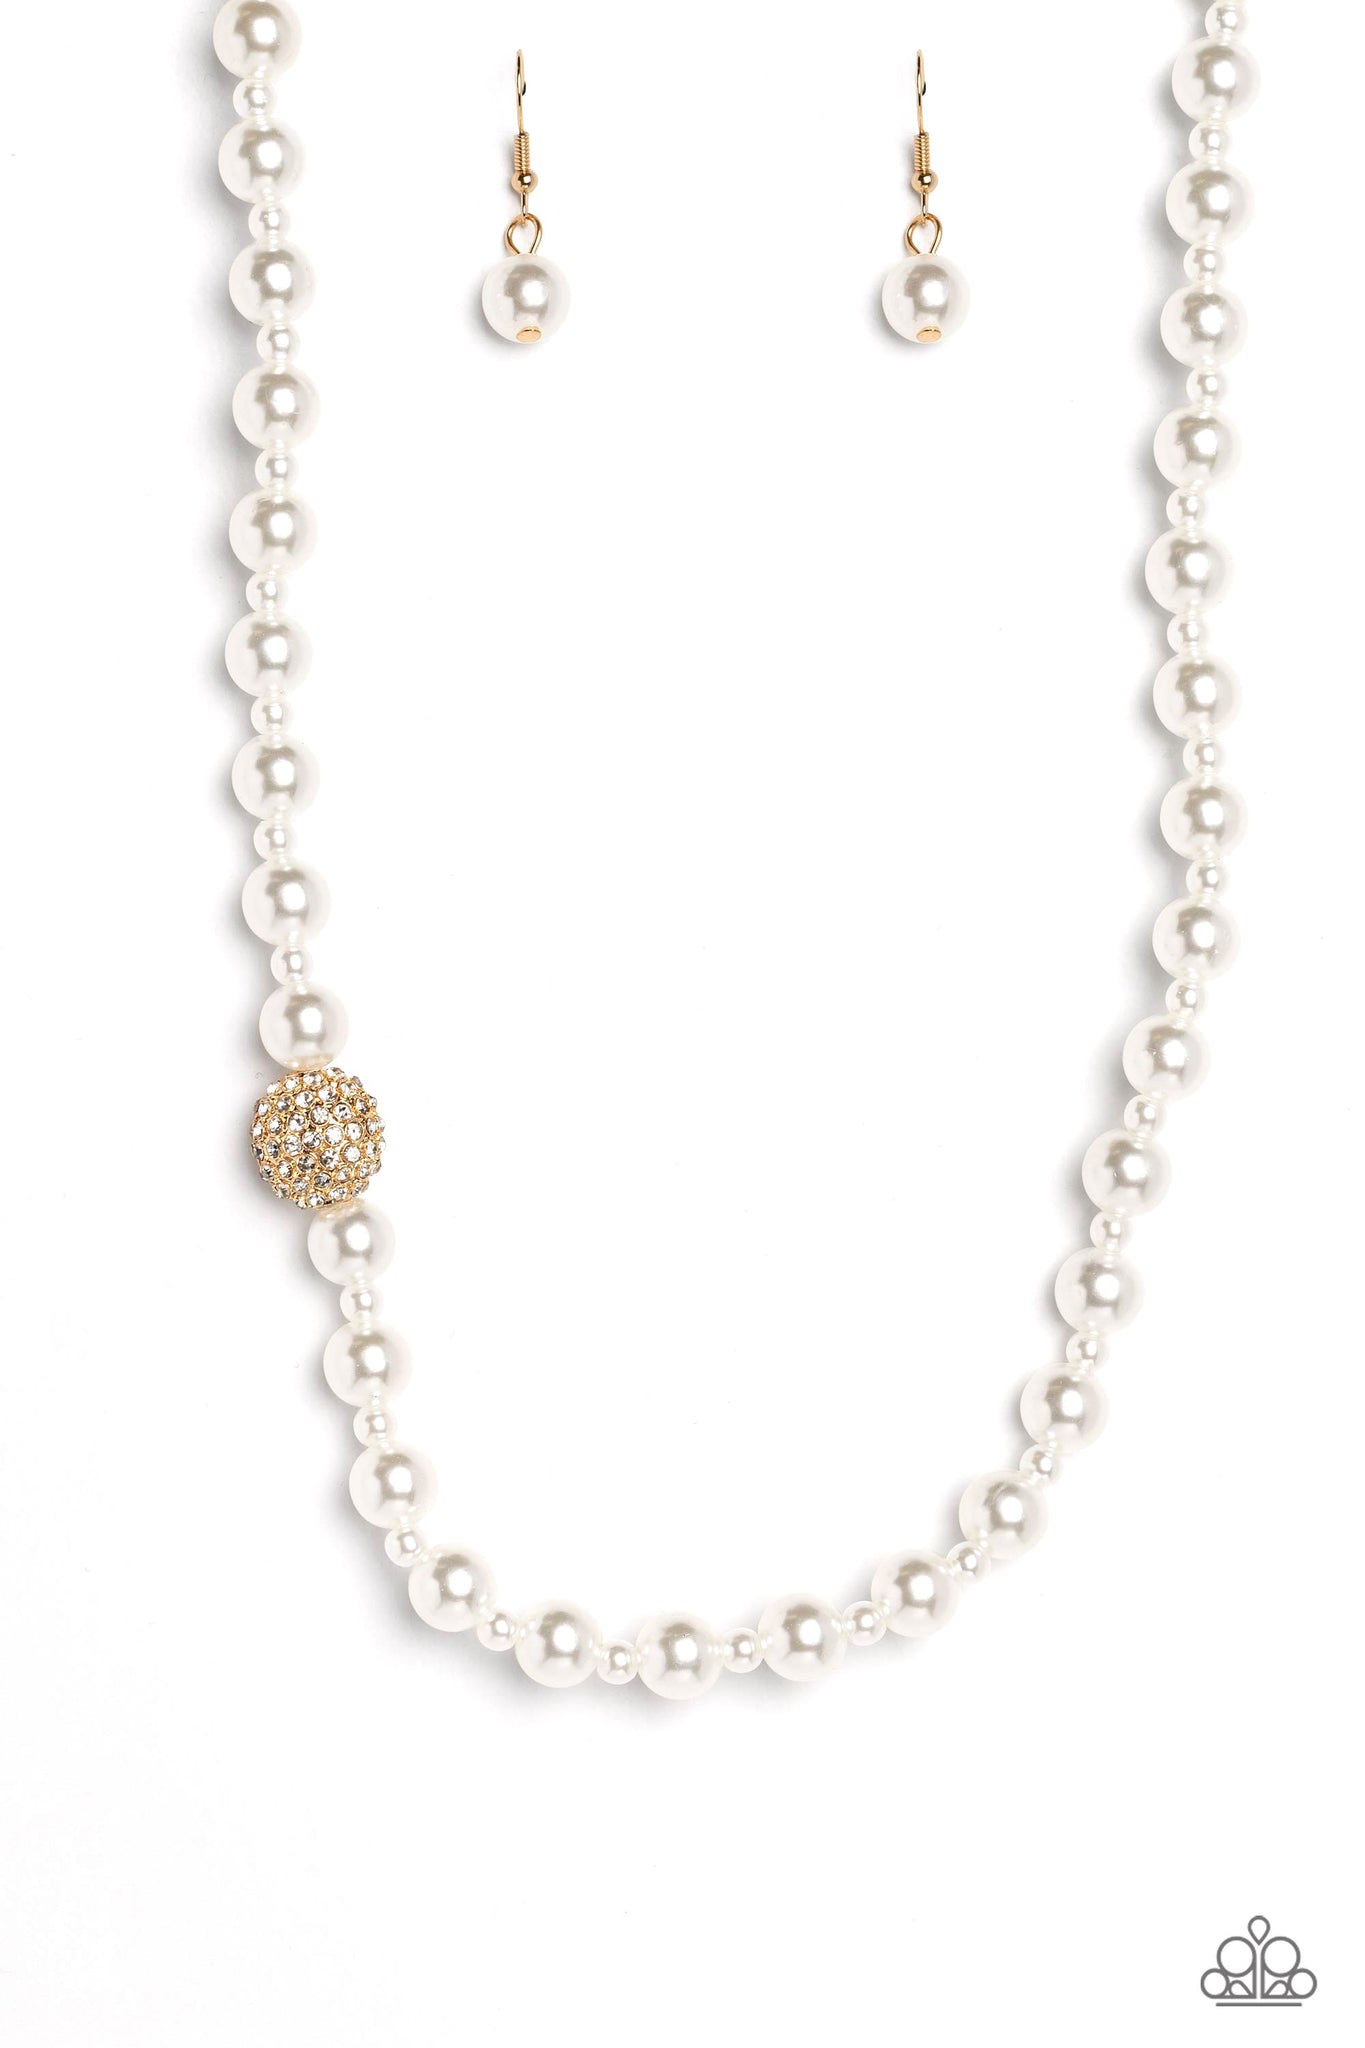 Paparazzi Positively PEARL-escent Silver Short Necklace – Bling Me Baby